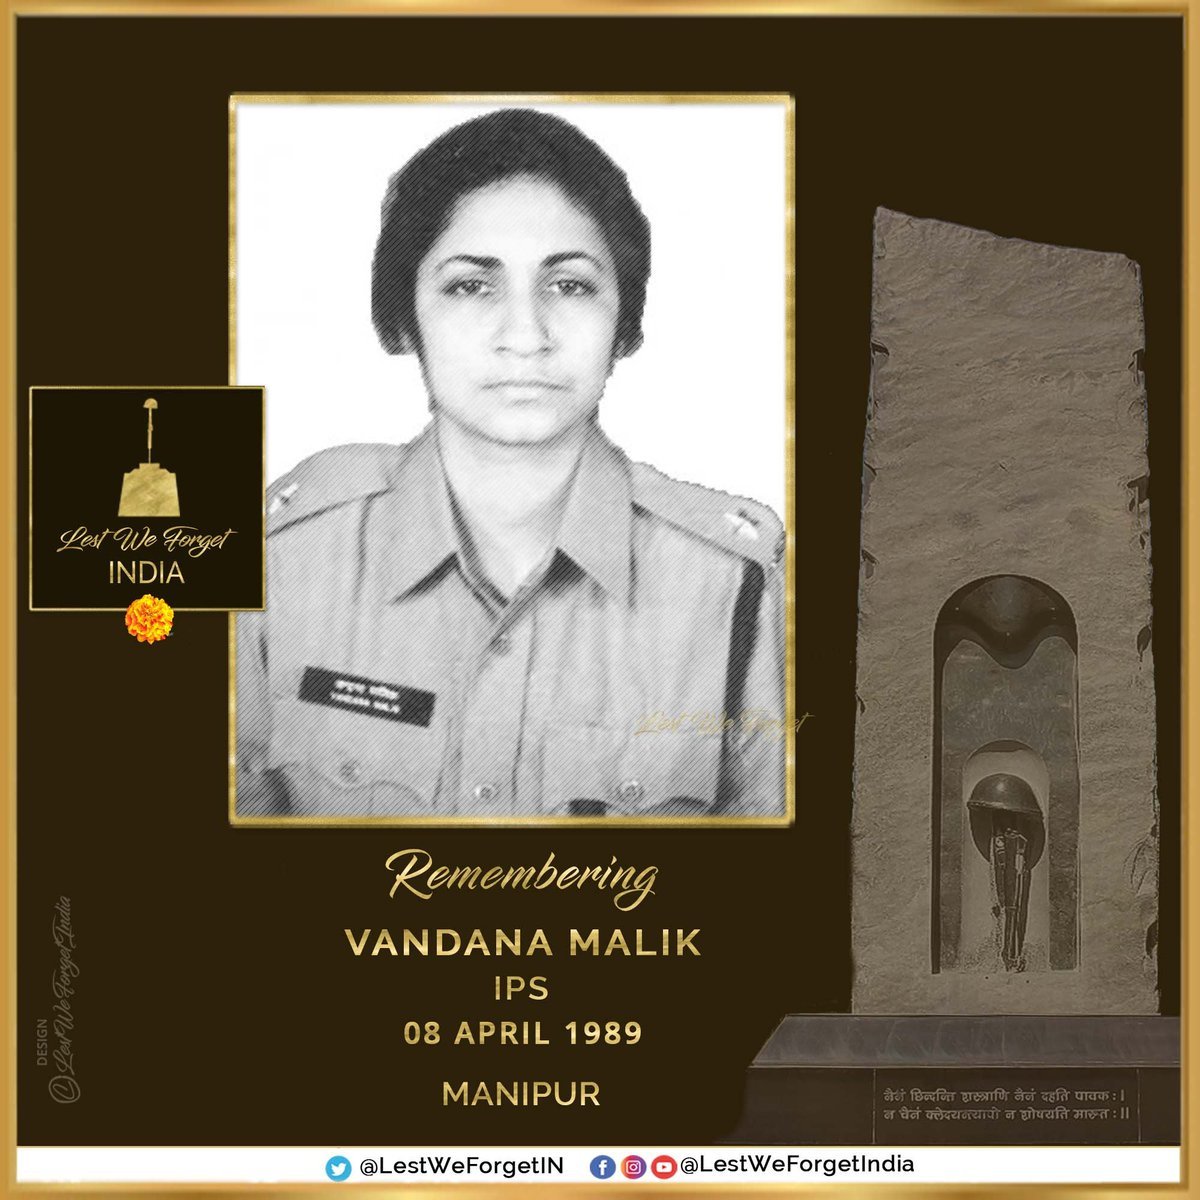 #LestWeForgetIndia🇮🇳 Vandana Malik, #IndianPoliceService, made the supreme sacrifice along with her driver & gunman, #OnThisDay 08 April in 1989, near Western College, a #Imphal West, Manipur- in an ambush by extremists Remember the valiant #IndianBraves in Khaki & their service…